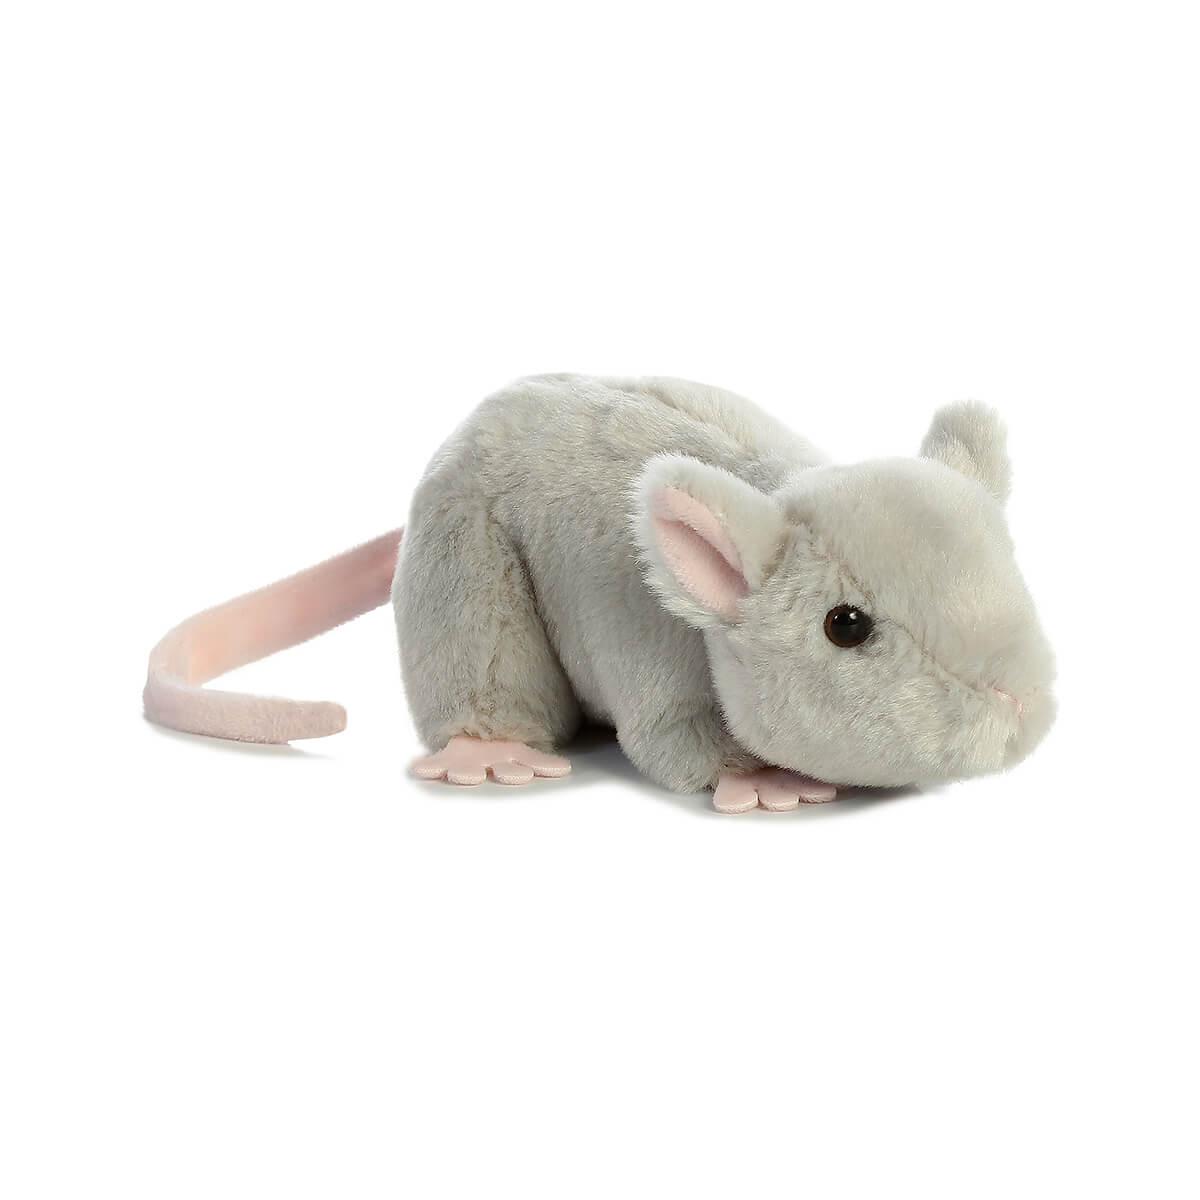  Grey Mouse 8 Inch Plush